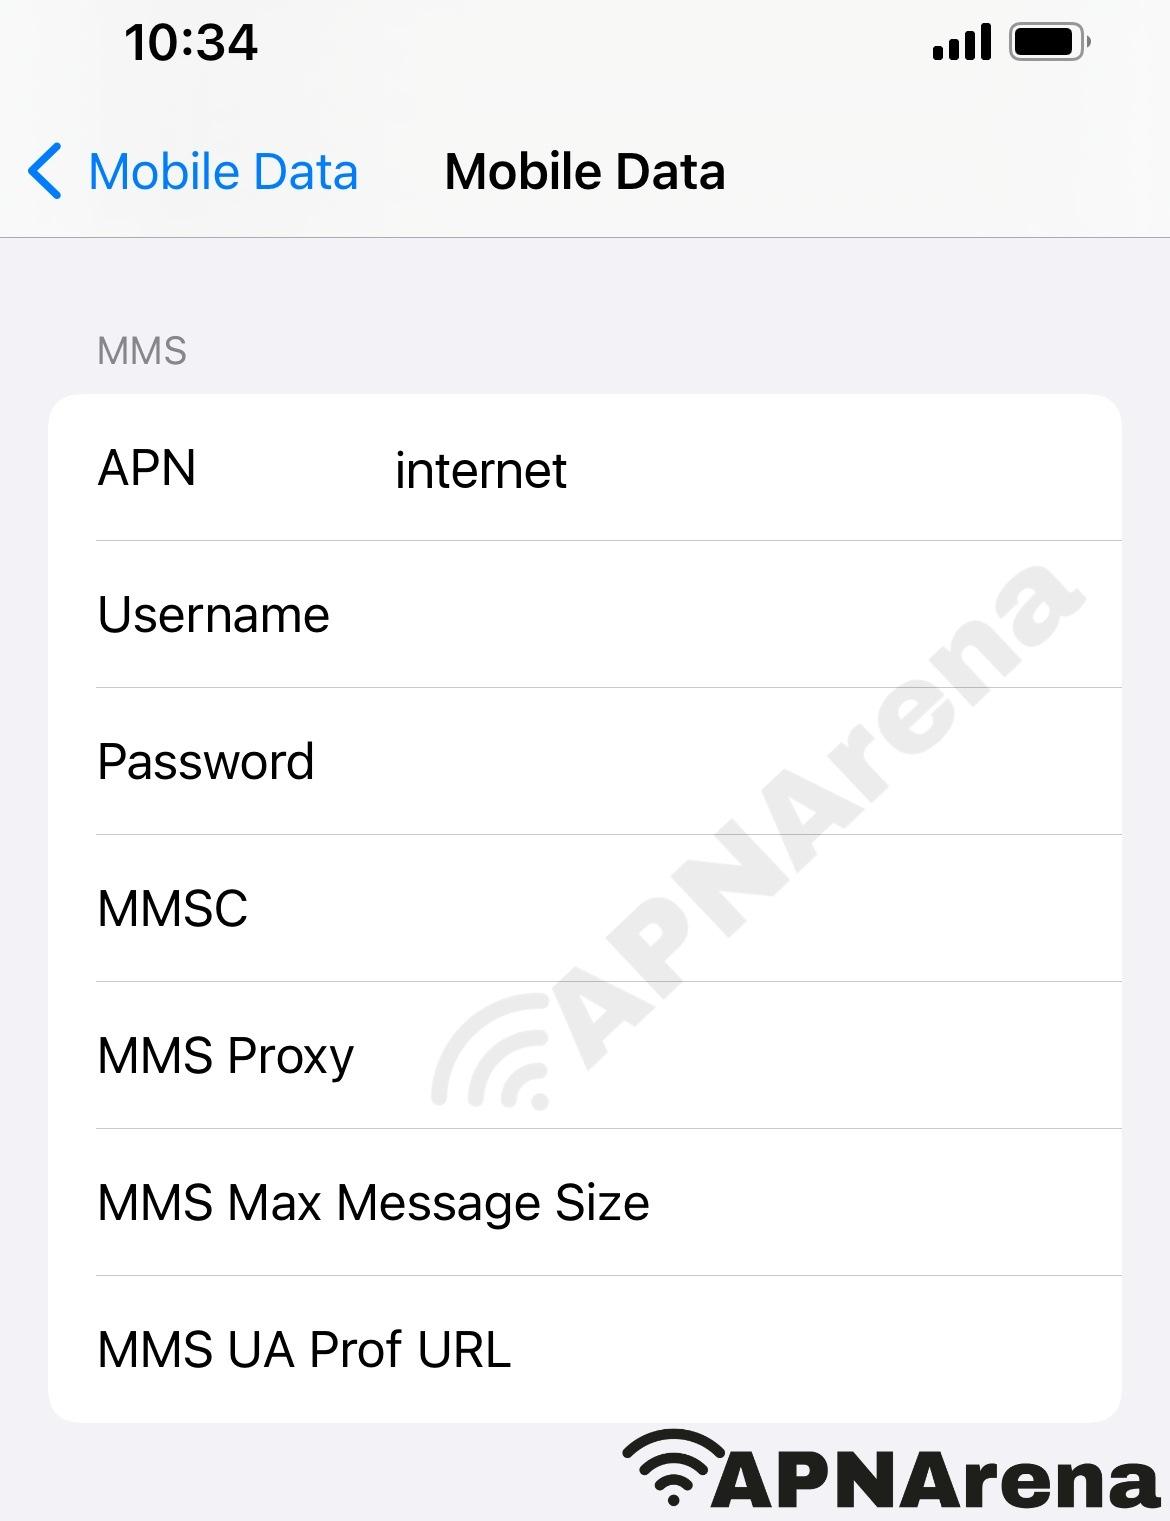 Syma mobile MMS Settings for iPhone